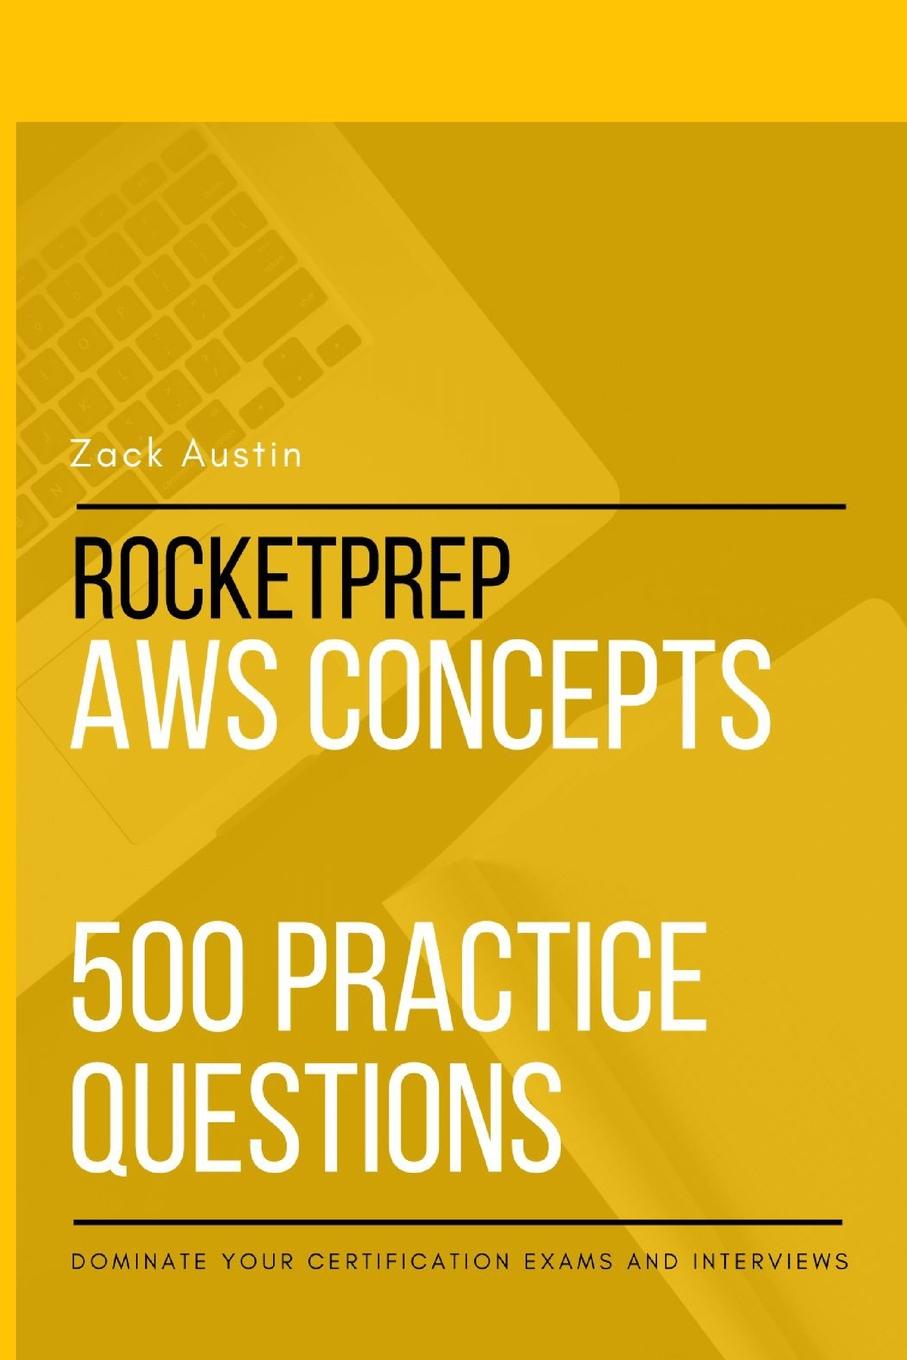 RocketPrep AWS Concepts 500 Practice Questions. Dominate Your Certification Exams and Interviews